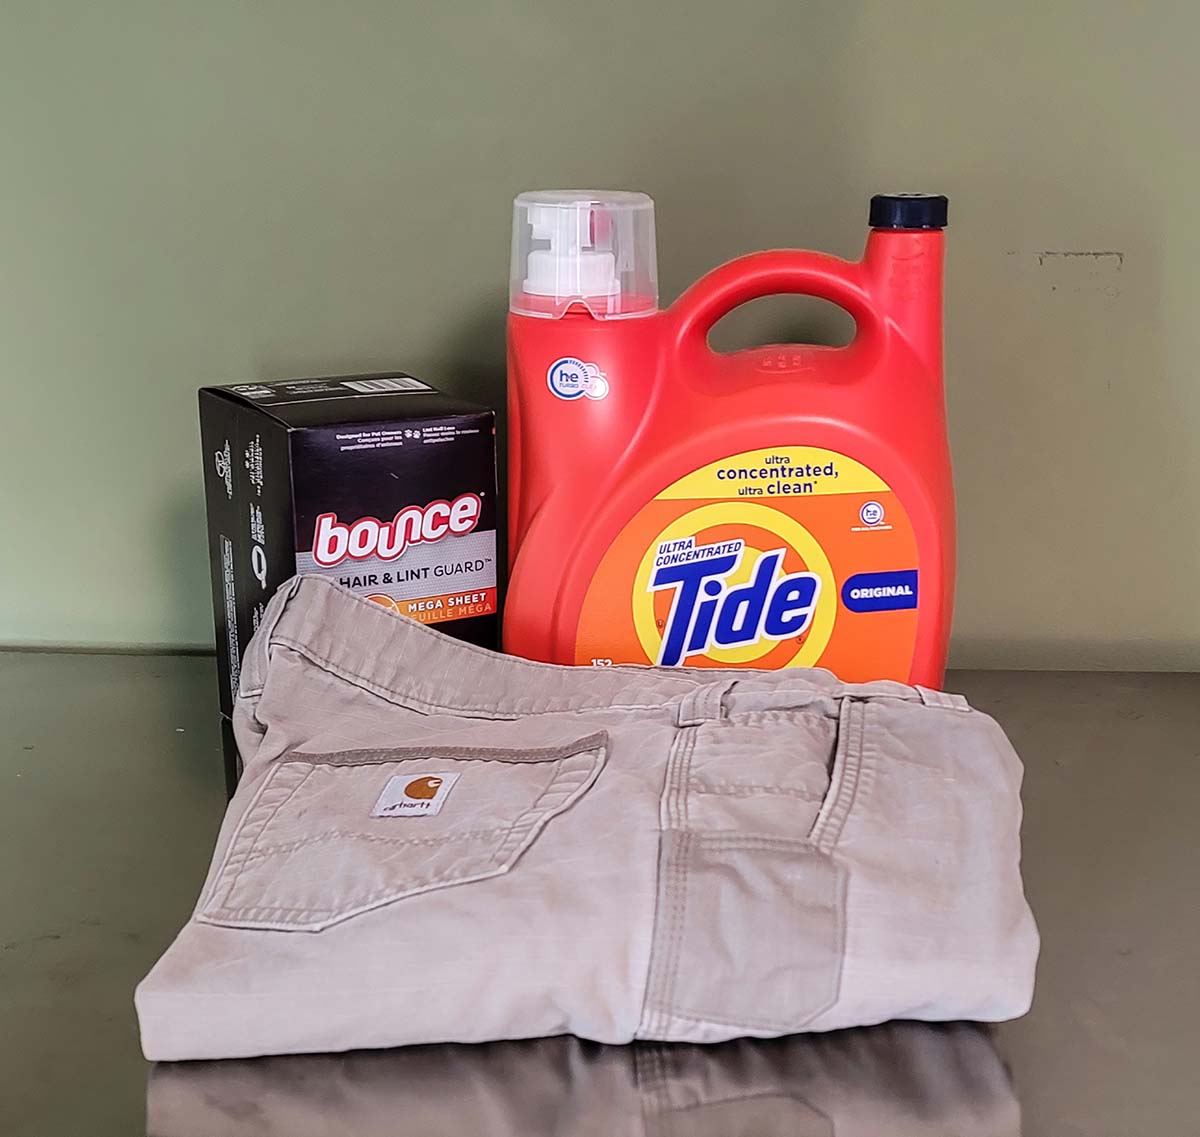 Pair of Carhartt Cargo Pants folded in front of laundry detergent and dryer sheets